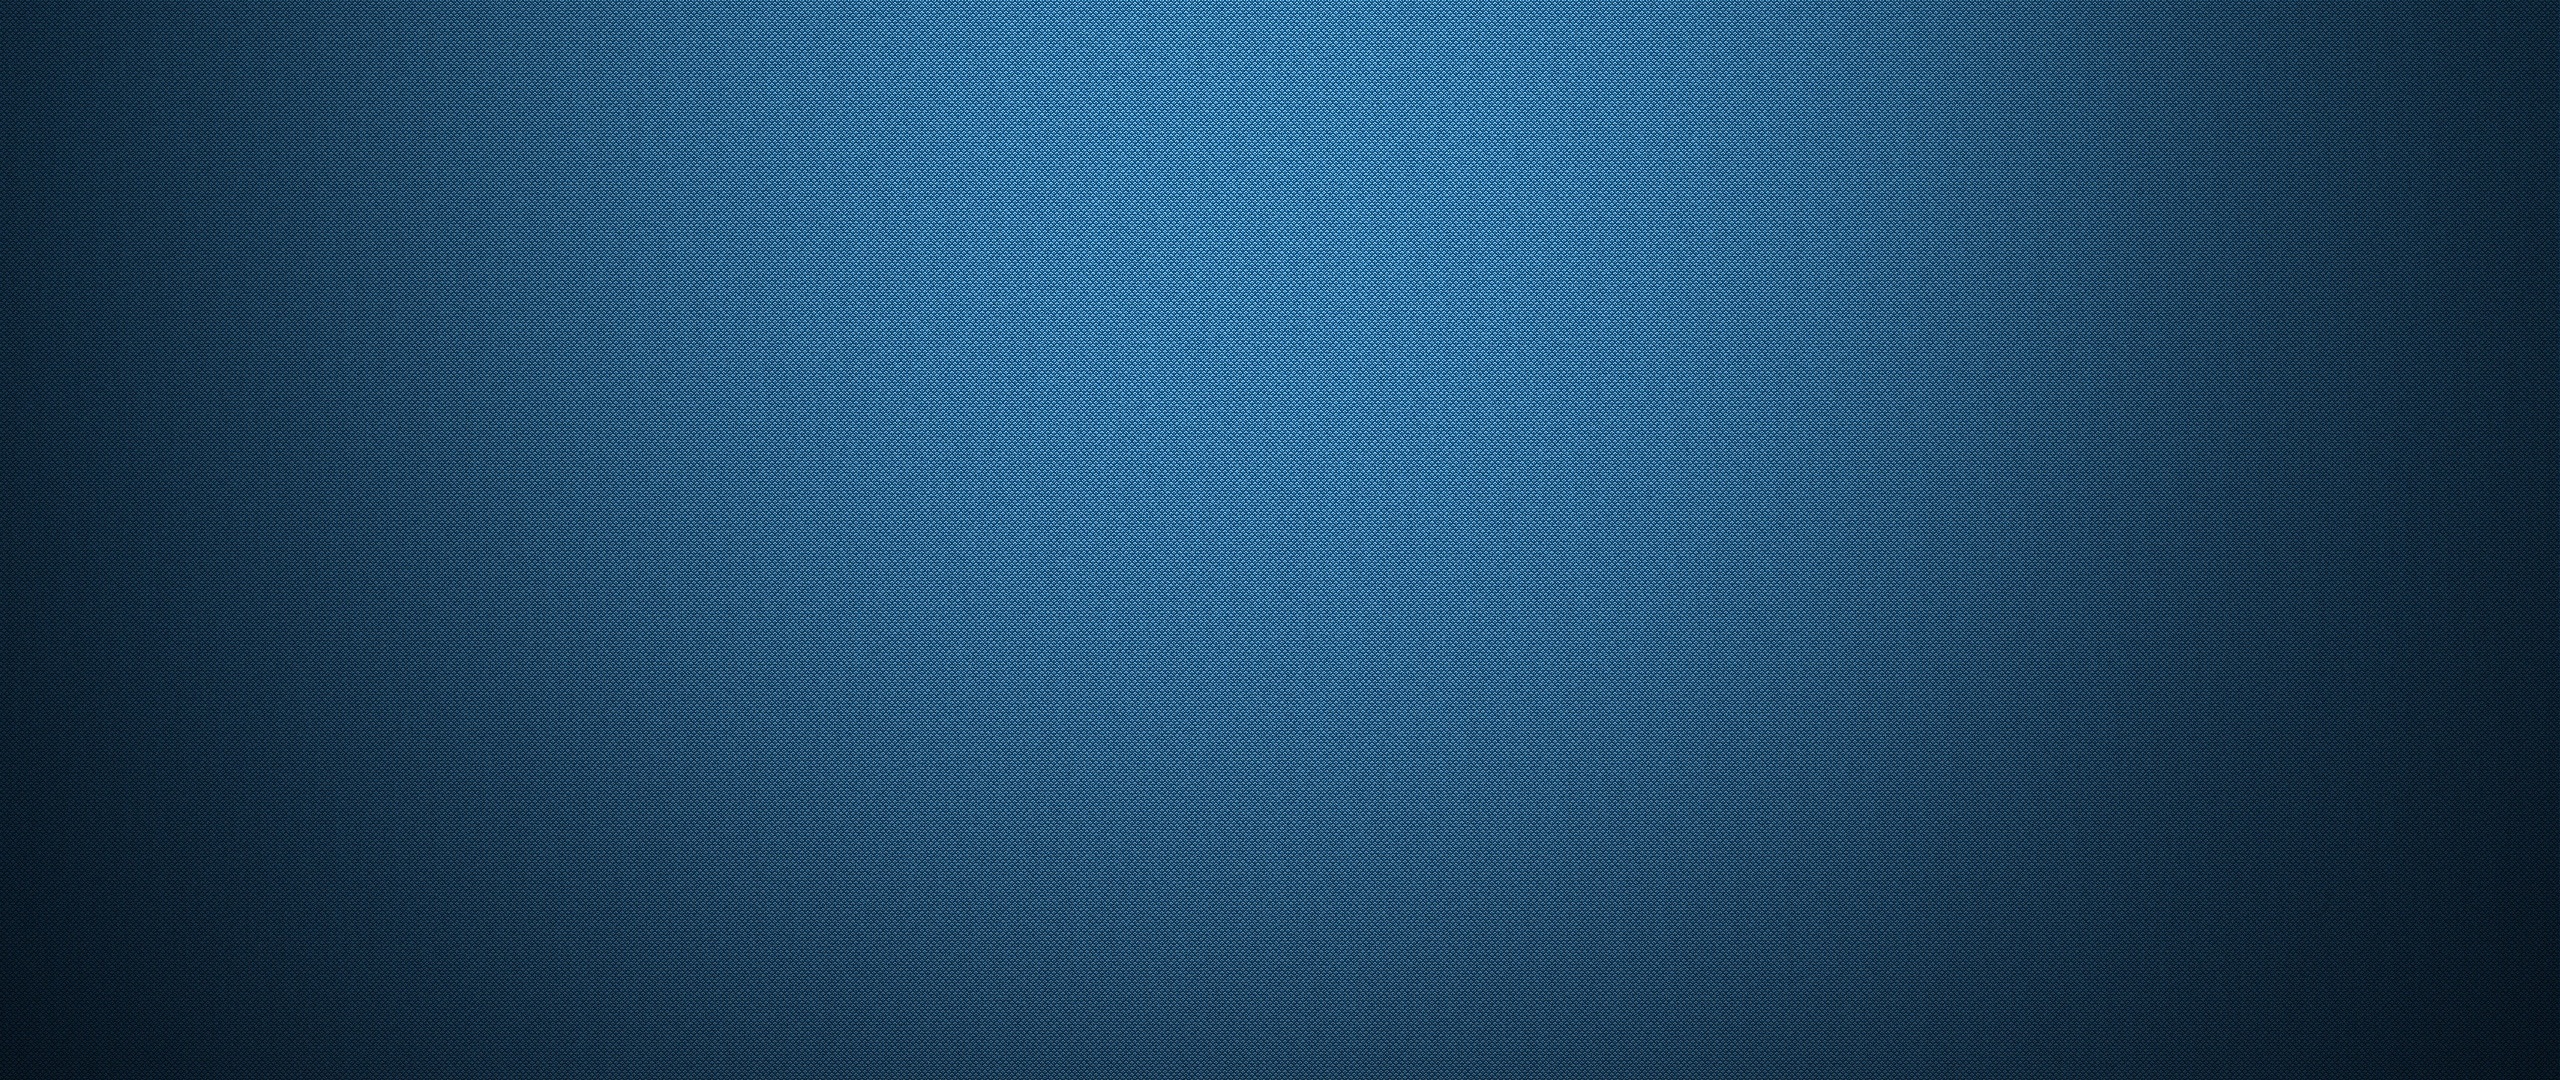 Download Wallpaper 2560x1080 Background, Texture, Solid, Surface ...